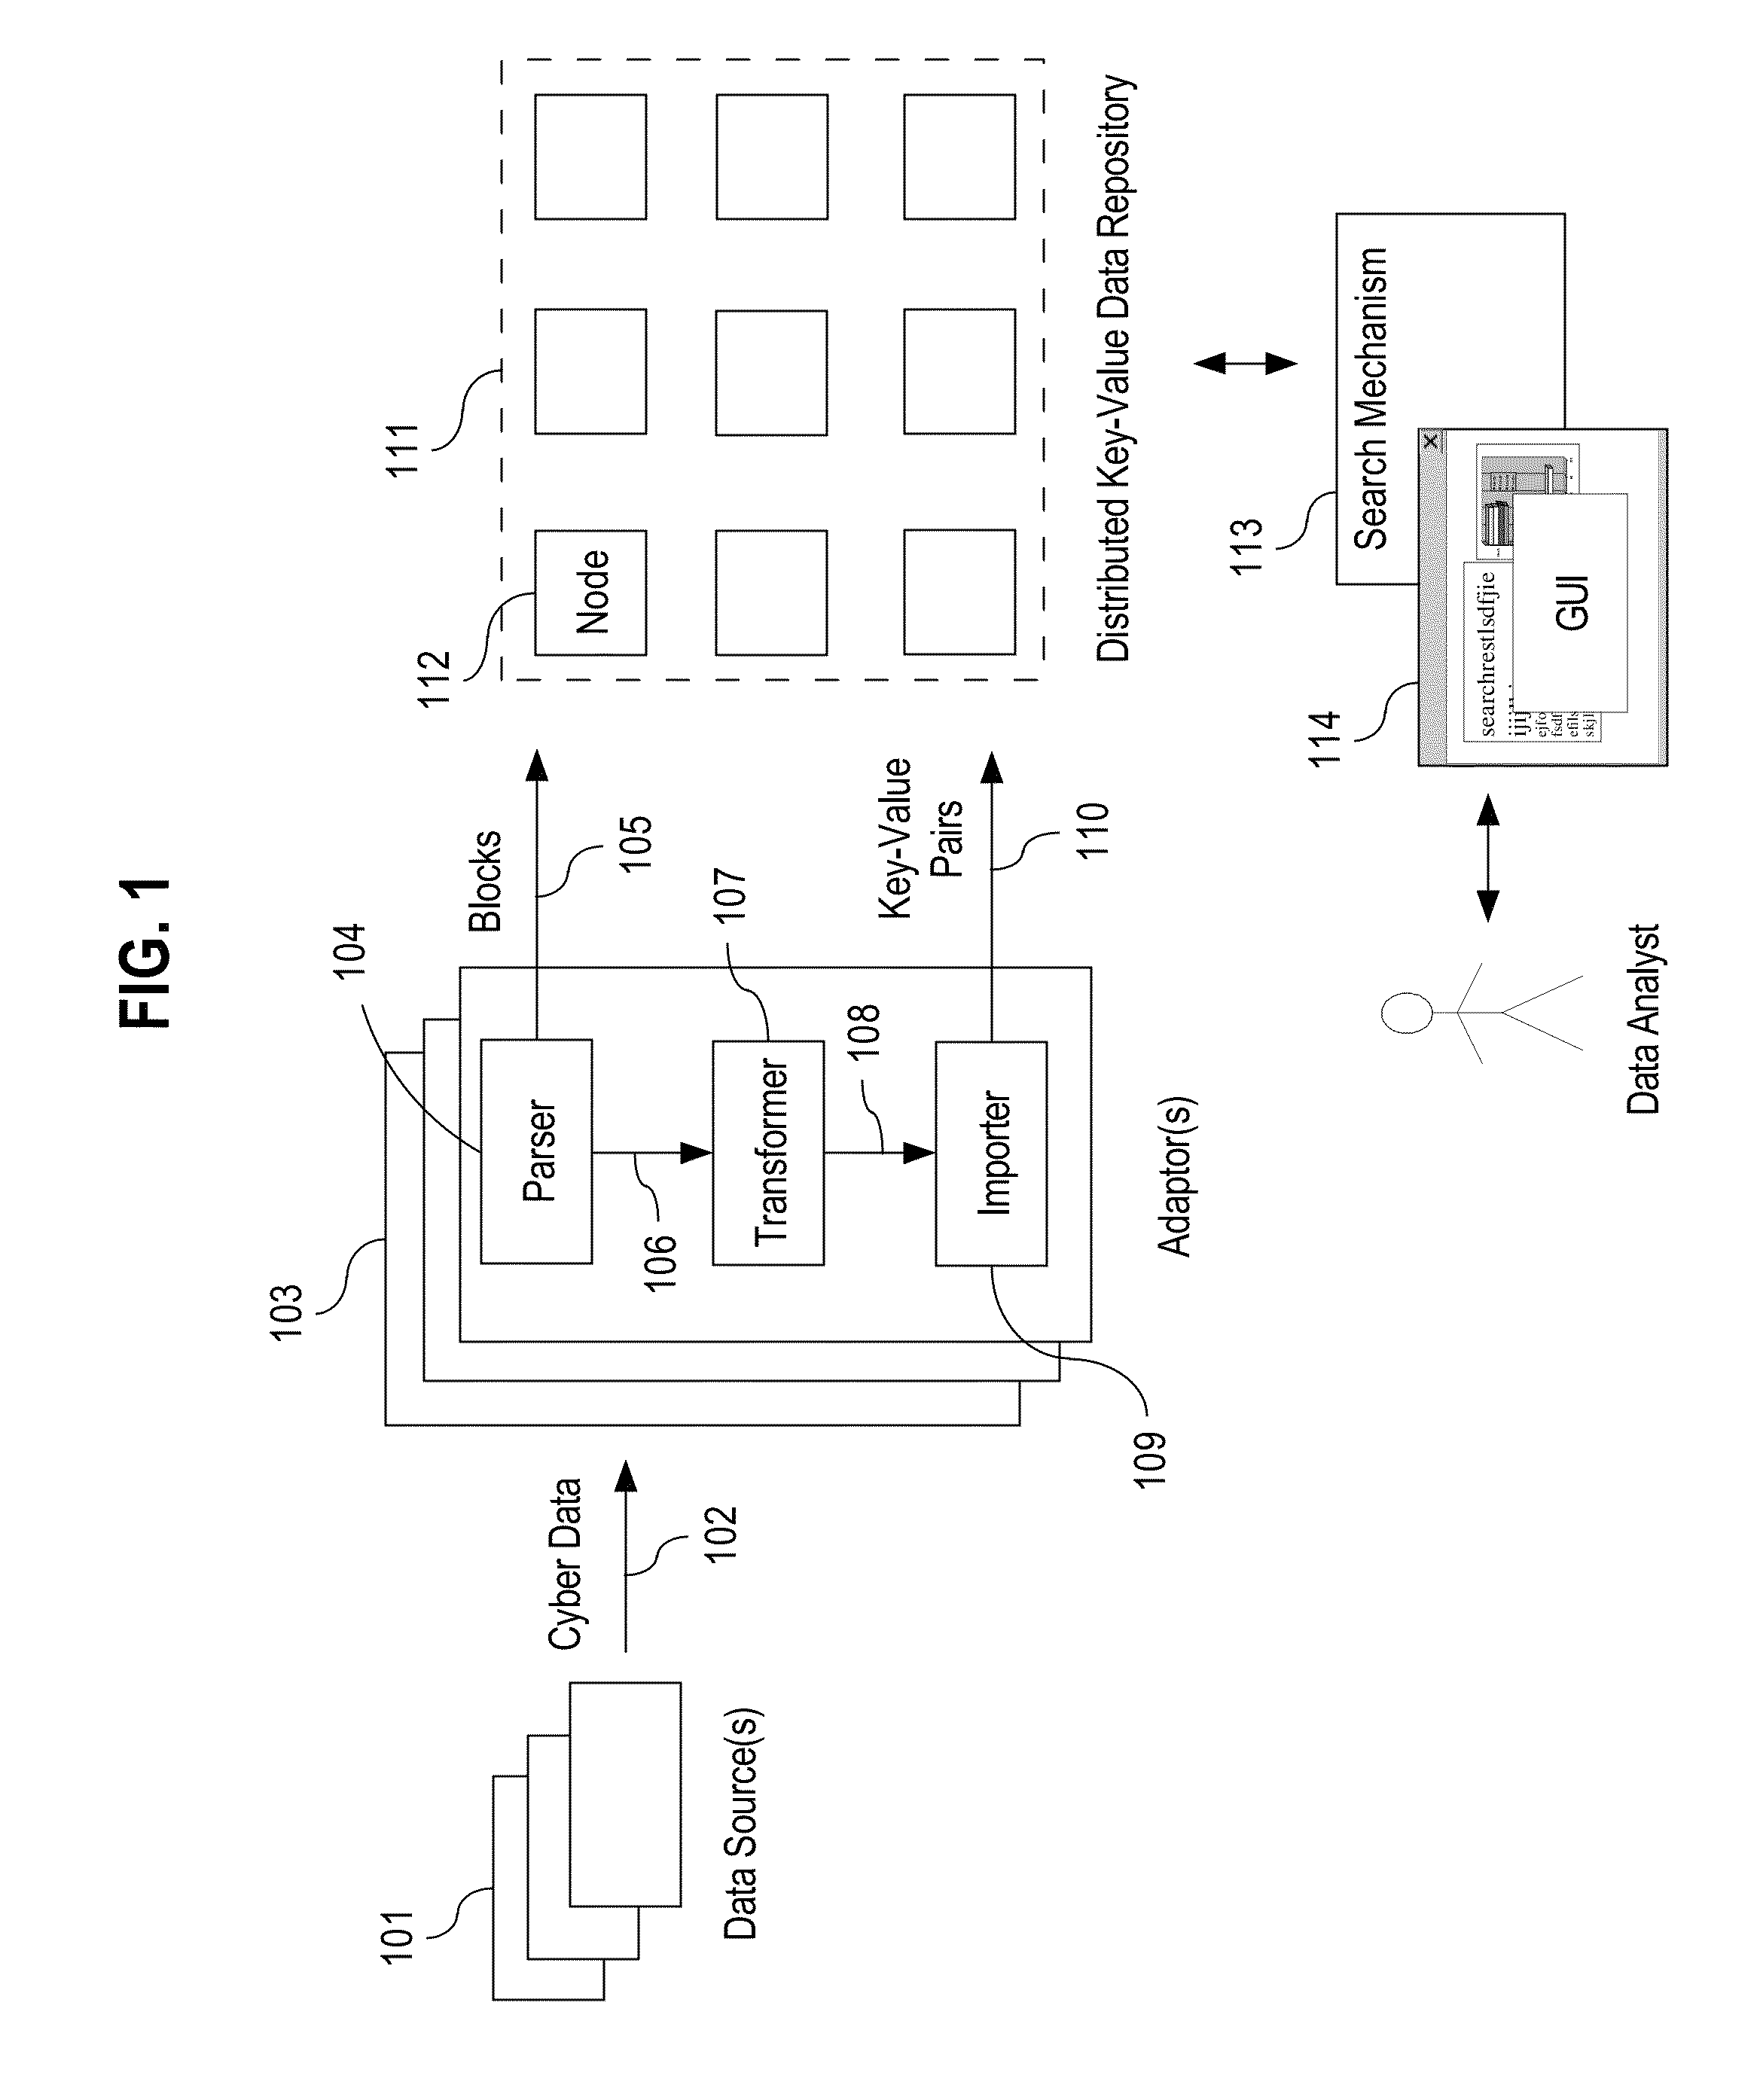 System and method for investigating large amounts of data